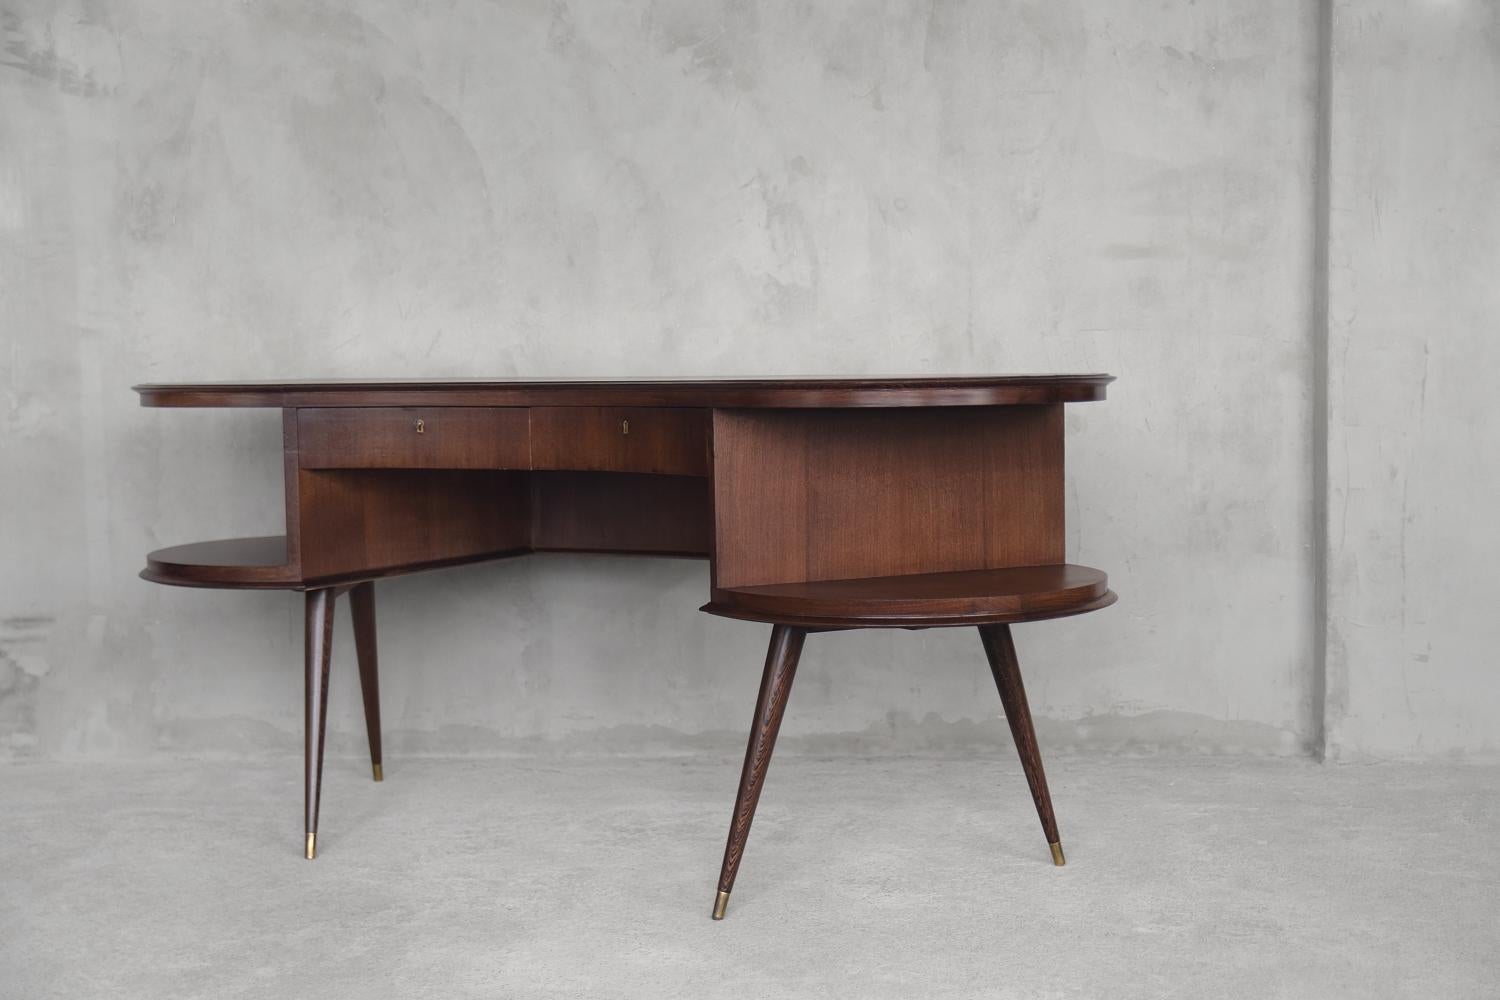 This very rare organic-shaped desk comes from Netherlands and was manufactured during the 1960s. It has a perfect boomerang form and is made from precious wenge wood with natural thin grain. With a creative and masterfully crafted wooden structure,